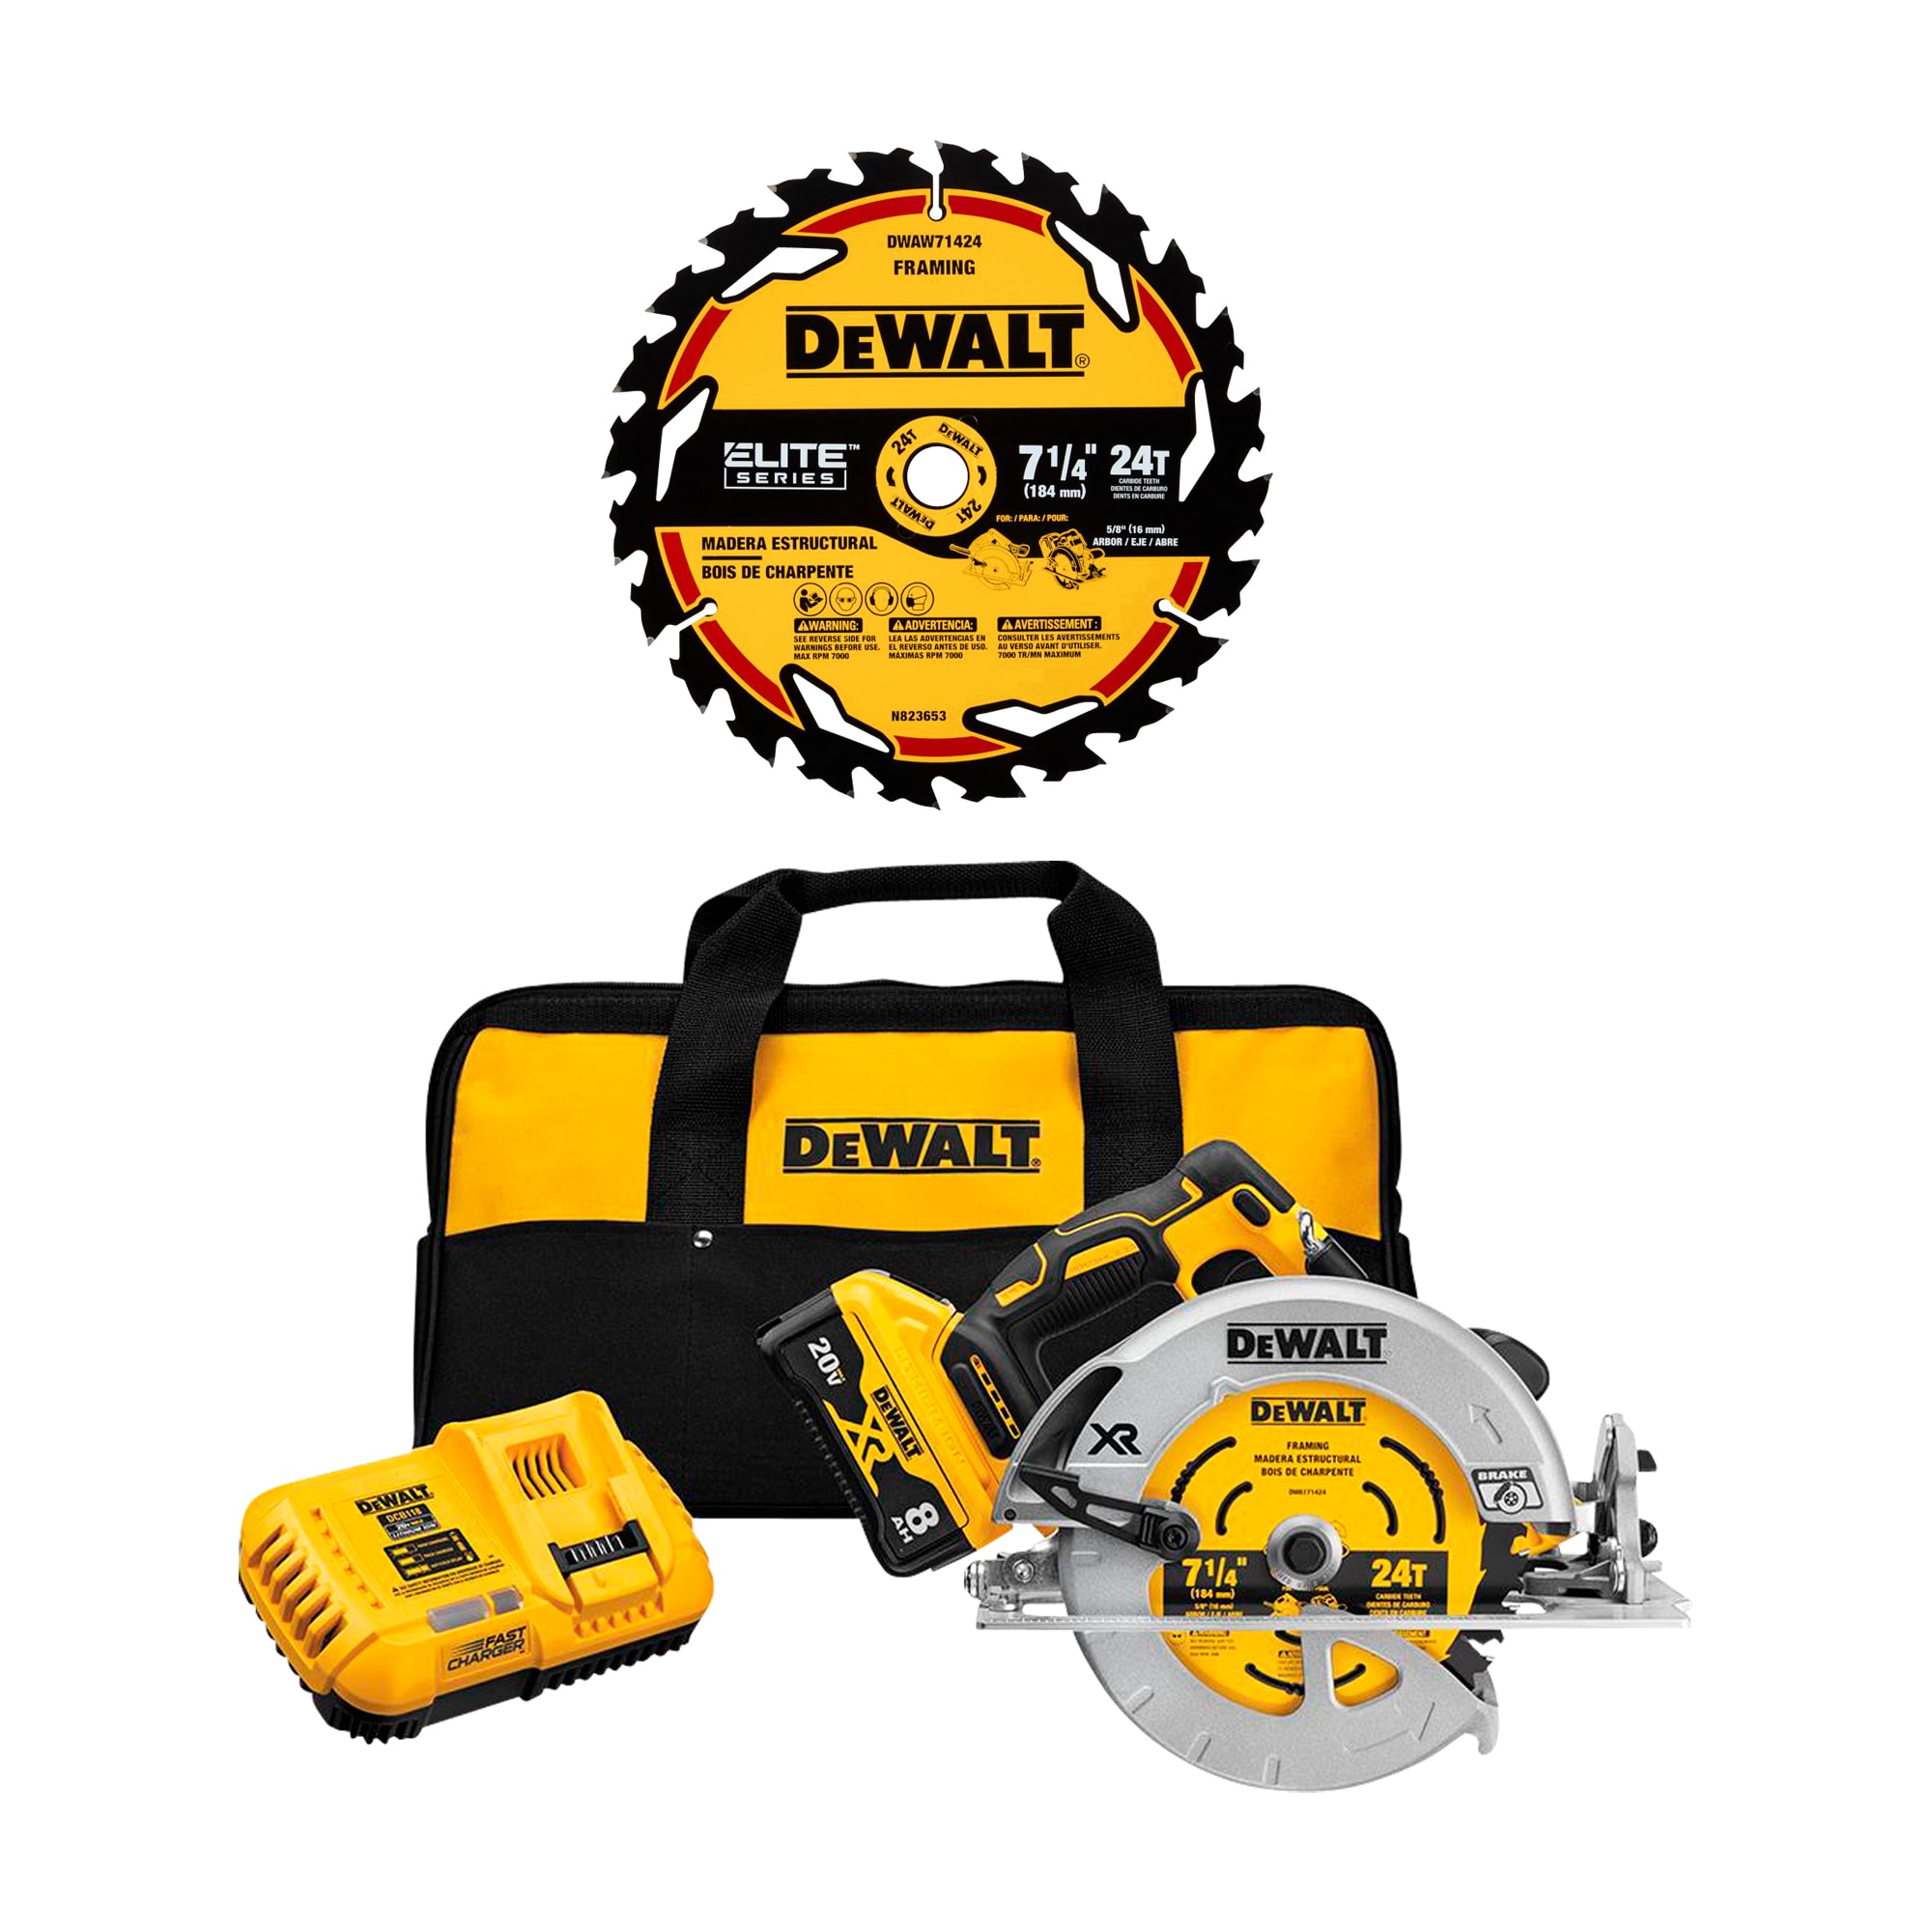 DEWALT XR POWER DETECT 20-Volt Max 7-1/4-in Brushless Cordless Circular Saw (1-Battery and Charger Included) & ELITE SERIES 7-1/4-in 24-Tooth